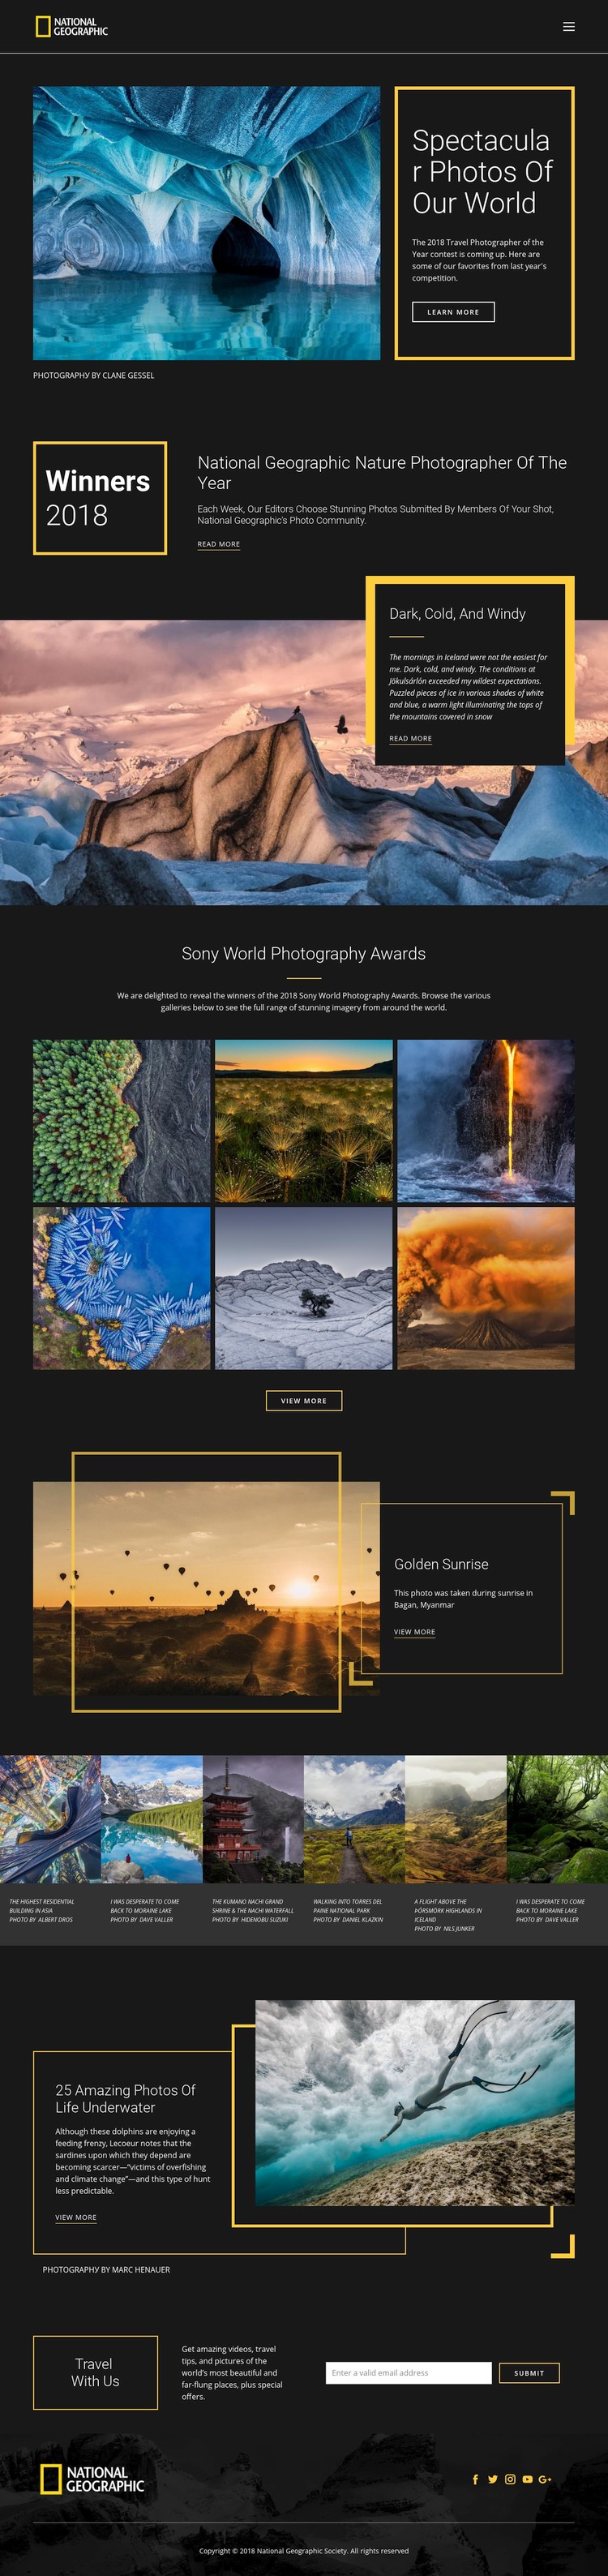 Pictures of nature Webflow Template Alternative